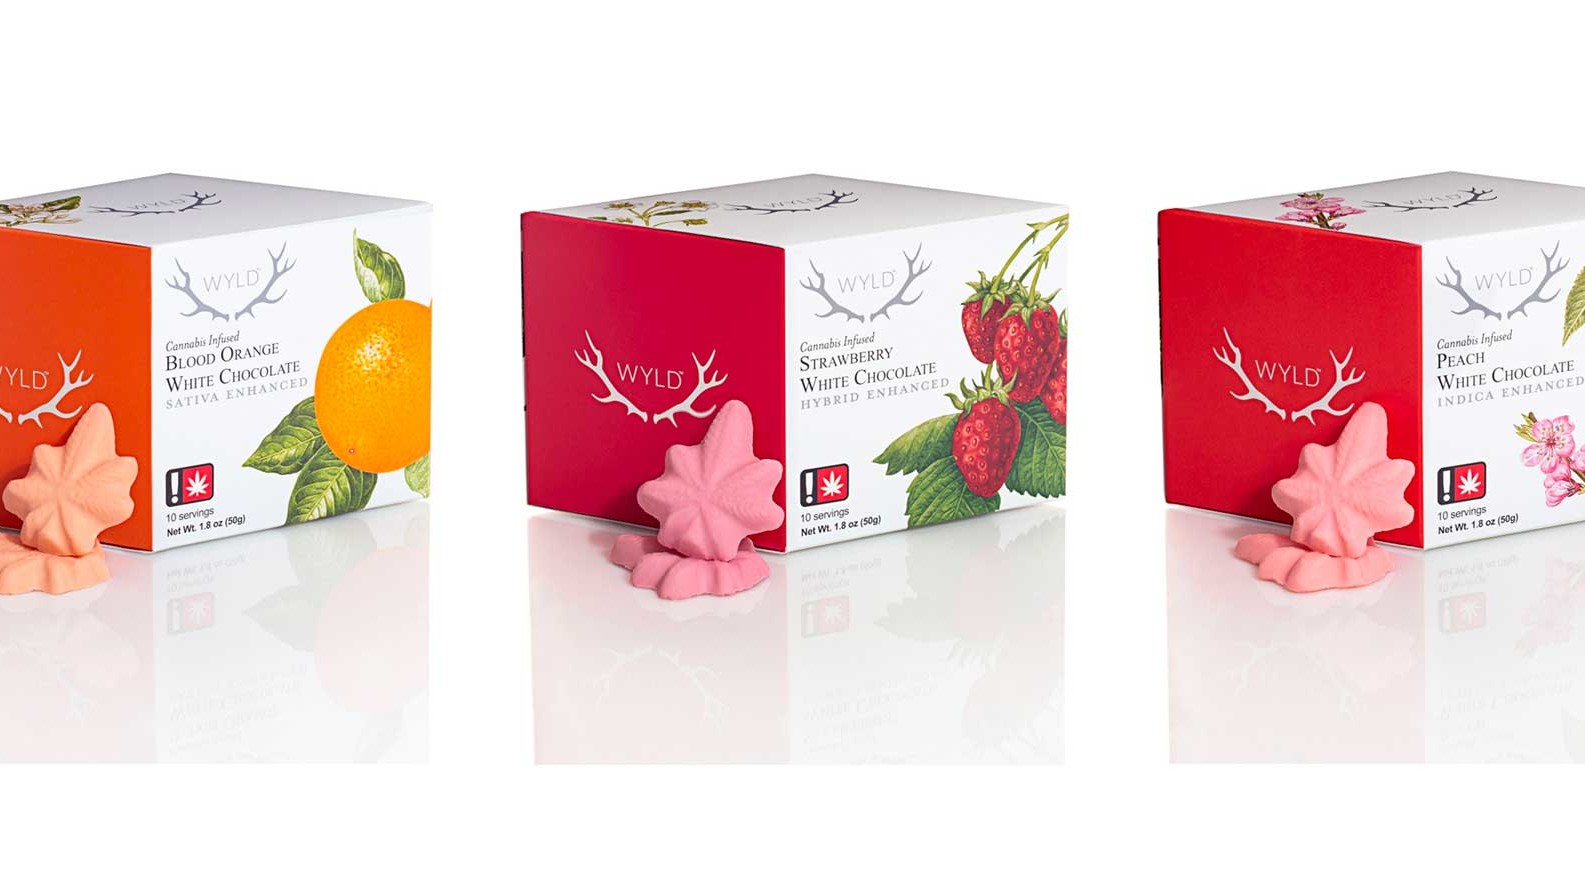 3 packages of Wyld White Chocolates in Blood Orange, Strawberry & Peach Flavors - available at Lightshade Dispensaries